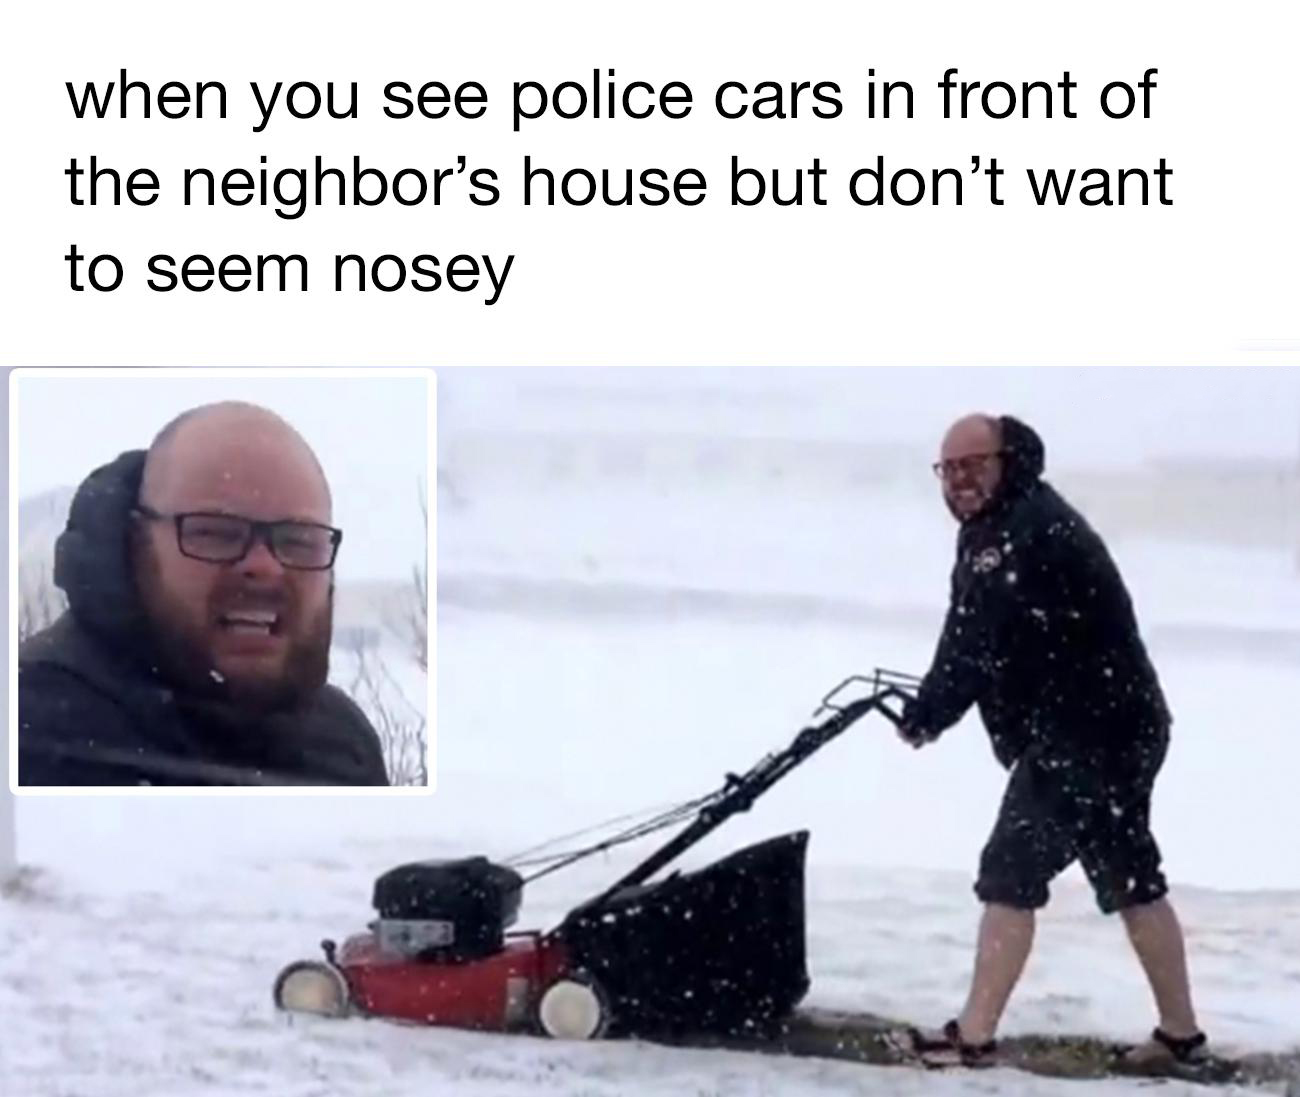 dank memes and funny pics - mowing the snow - when you see police cars in front of the neighbor's house but don't want to seem nosey